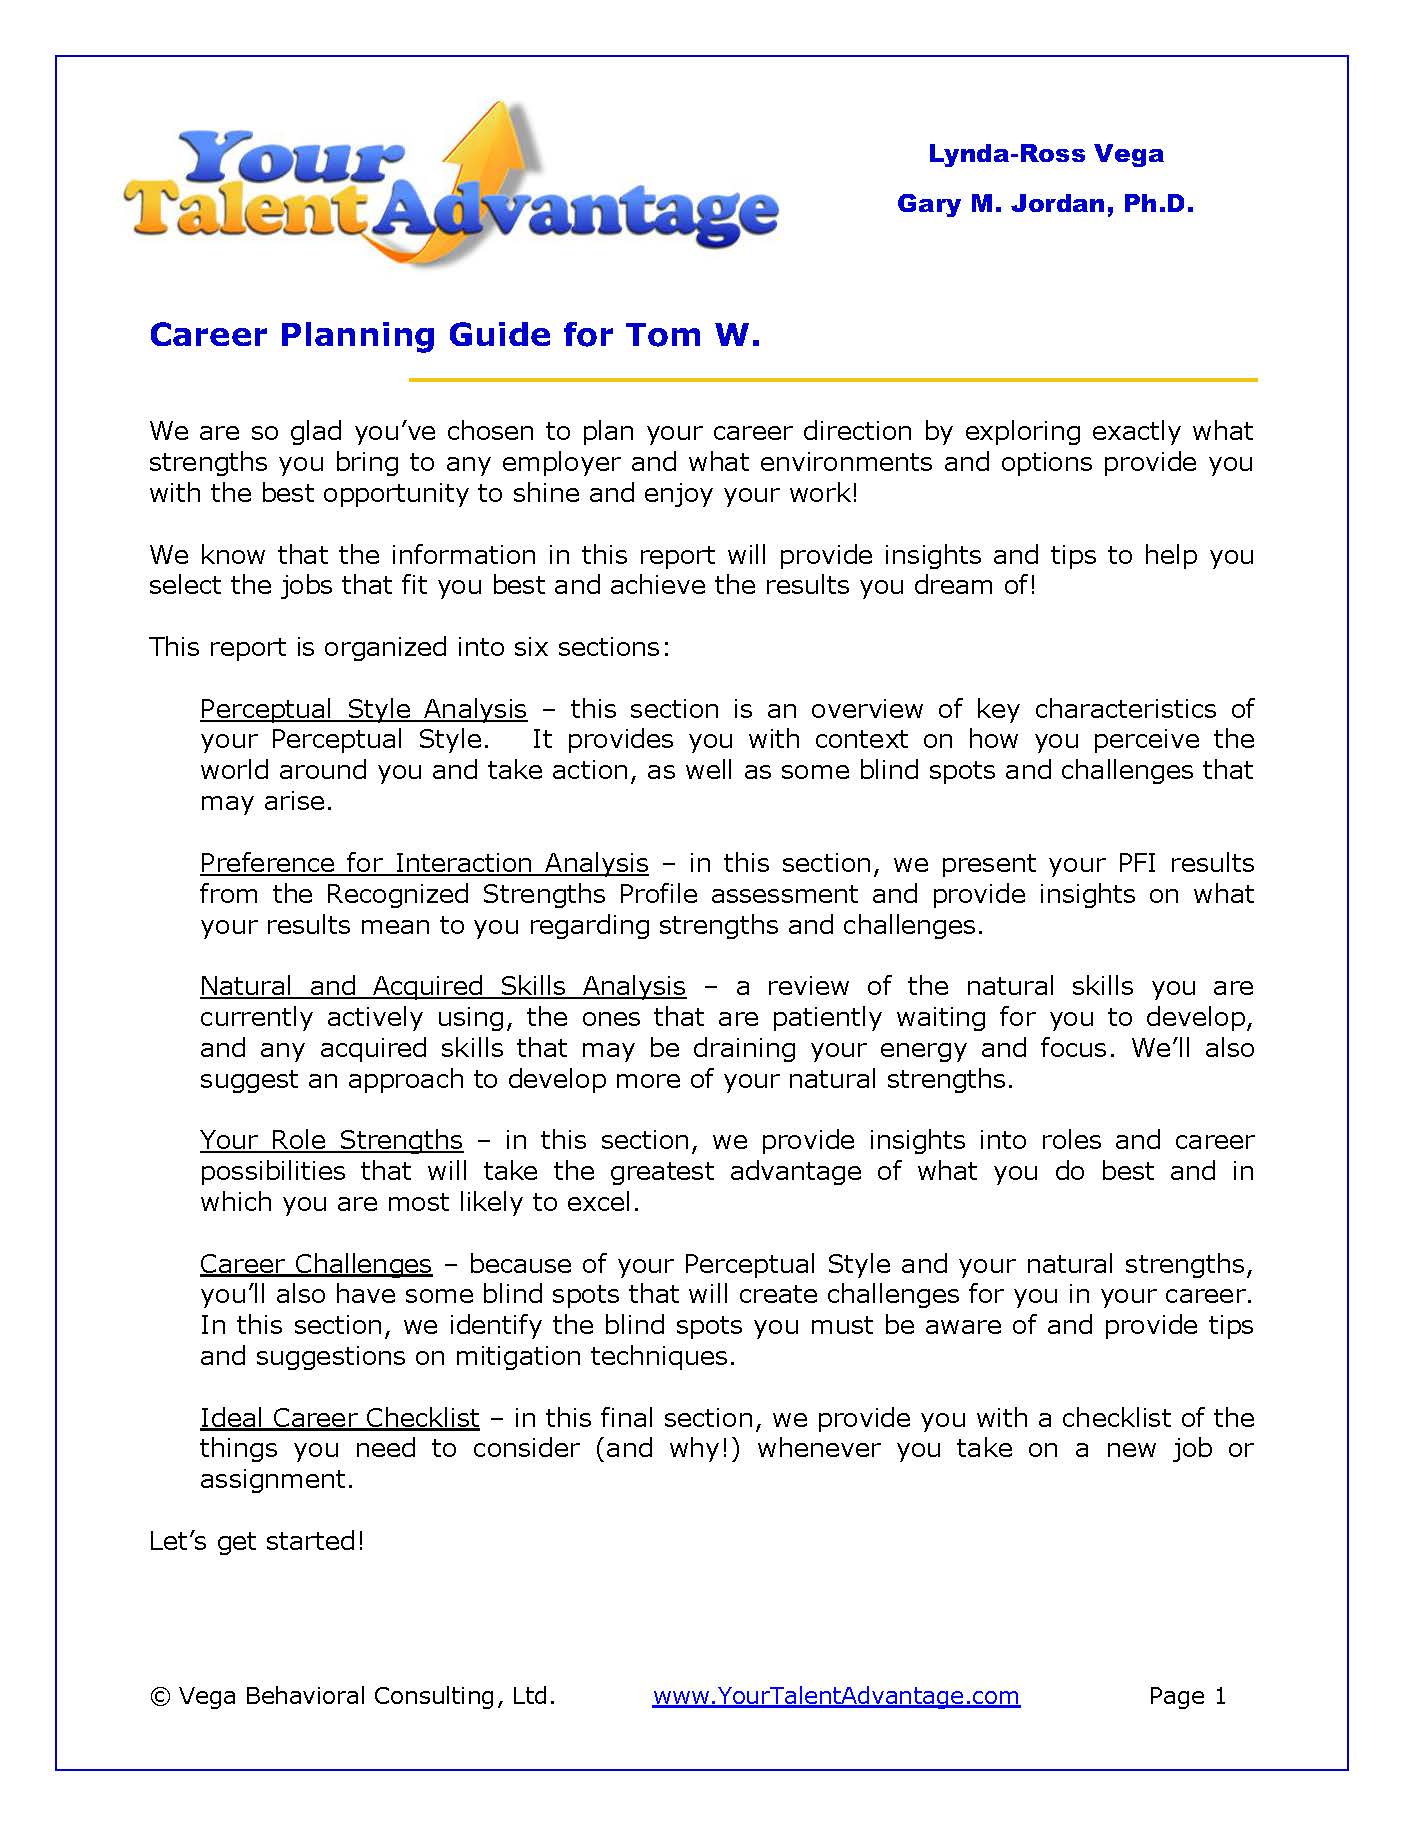 Screenshot of a sample report from our Career Planning Guide